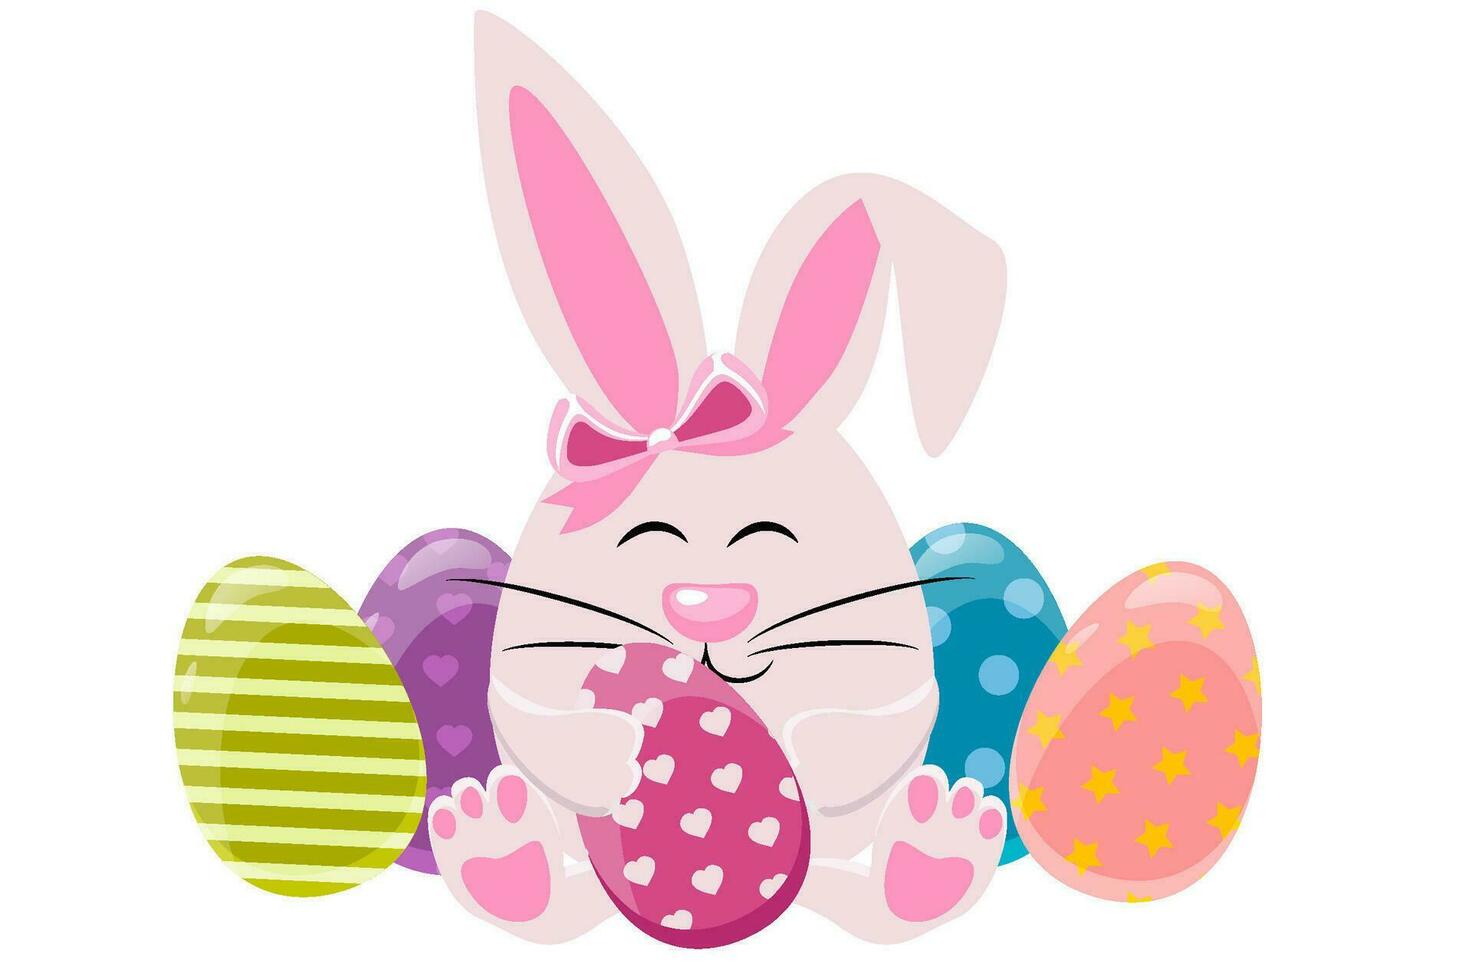 Easter Rabbit with eggs. Vector Illustration Of Cute Little Bunny Holding Easter Eggs.